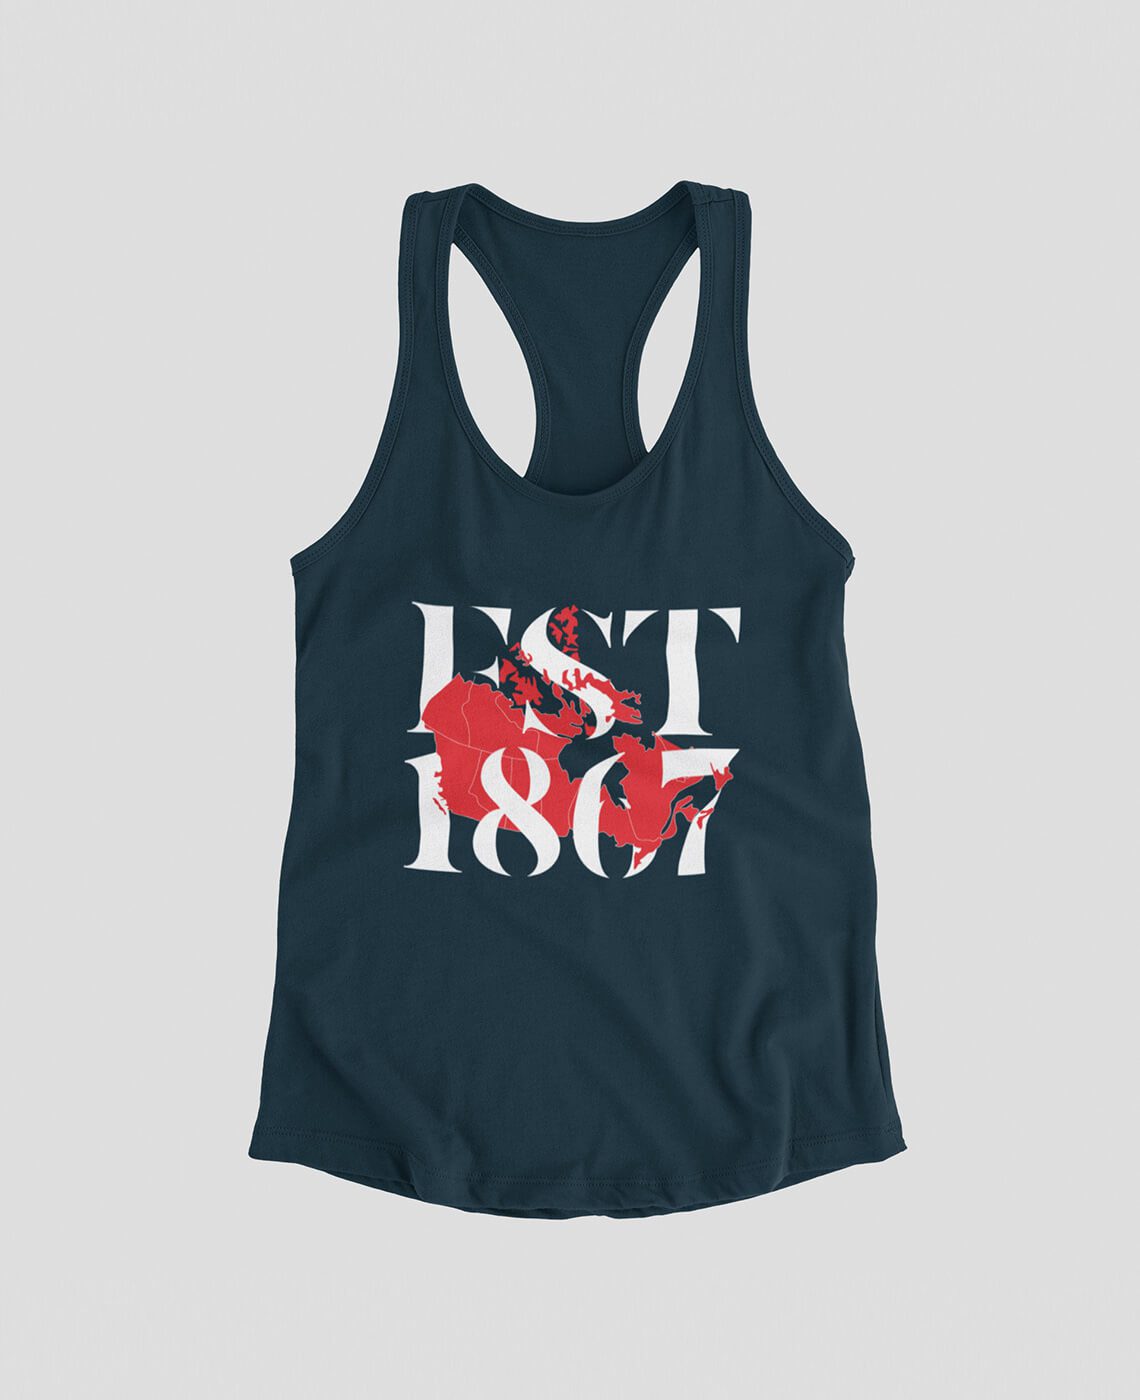 1867 one7 womens tank top 1